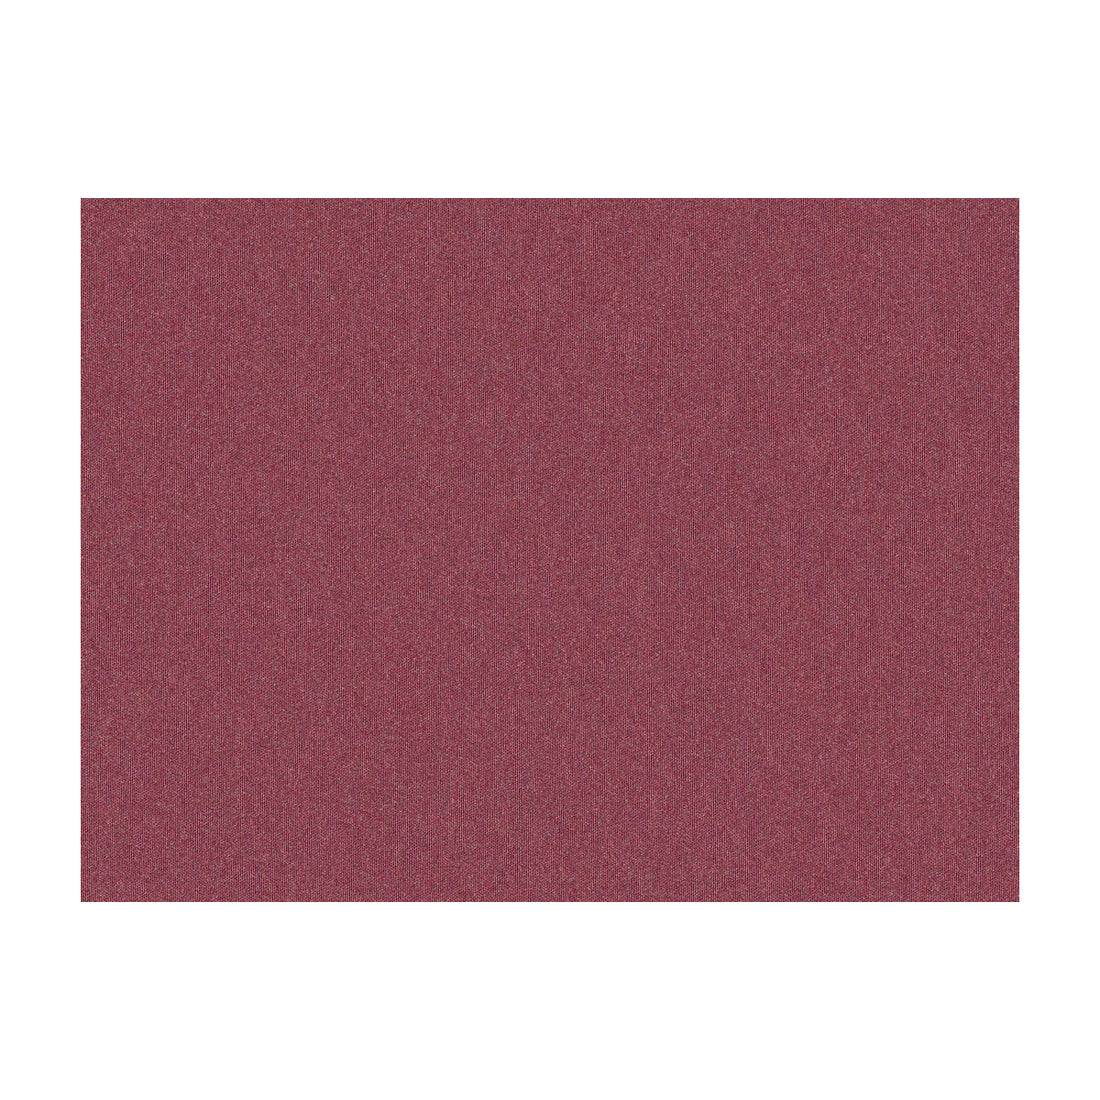 Shots fabric in cabernet color - pattern JAG-50020.910.0 - by Brunschwig &amp; Fils in the Jagtar collection